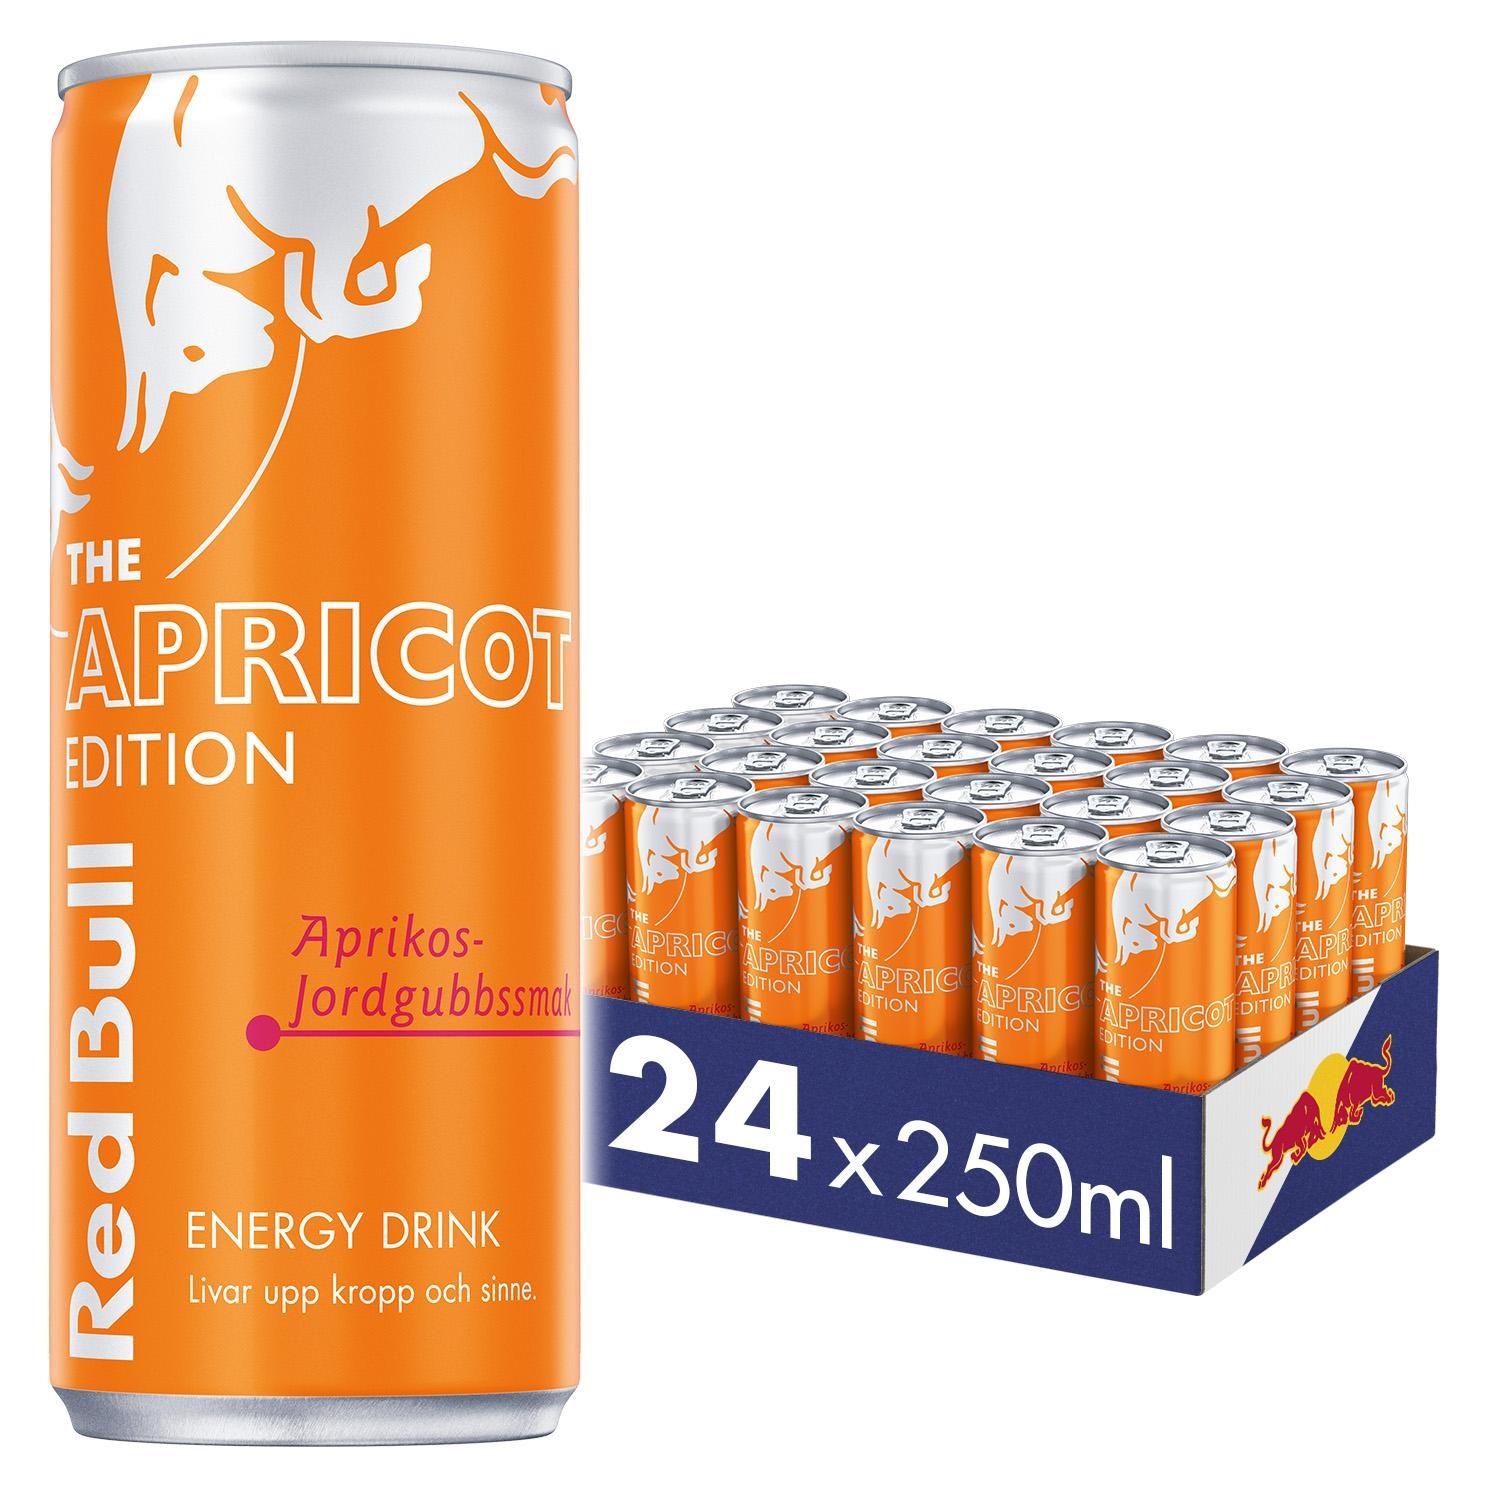 Red Bull Apricot Edition24x250ml.